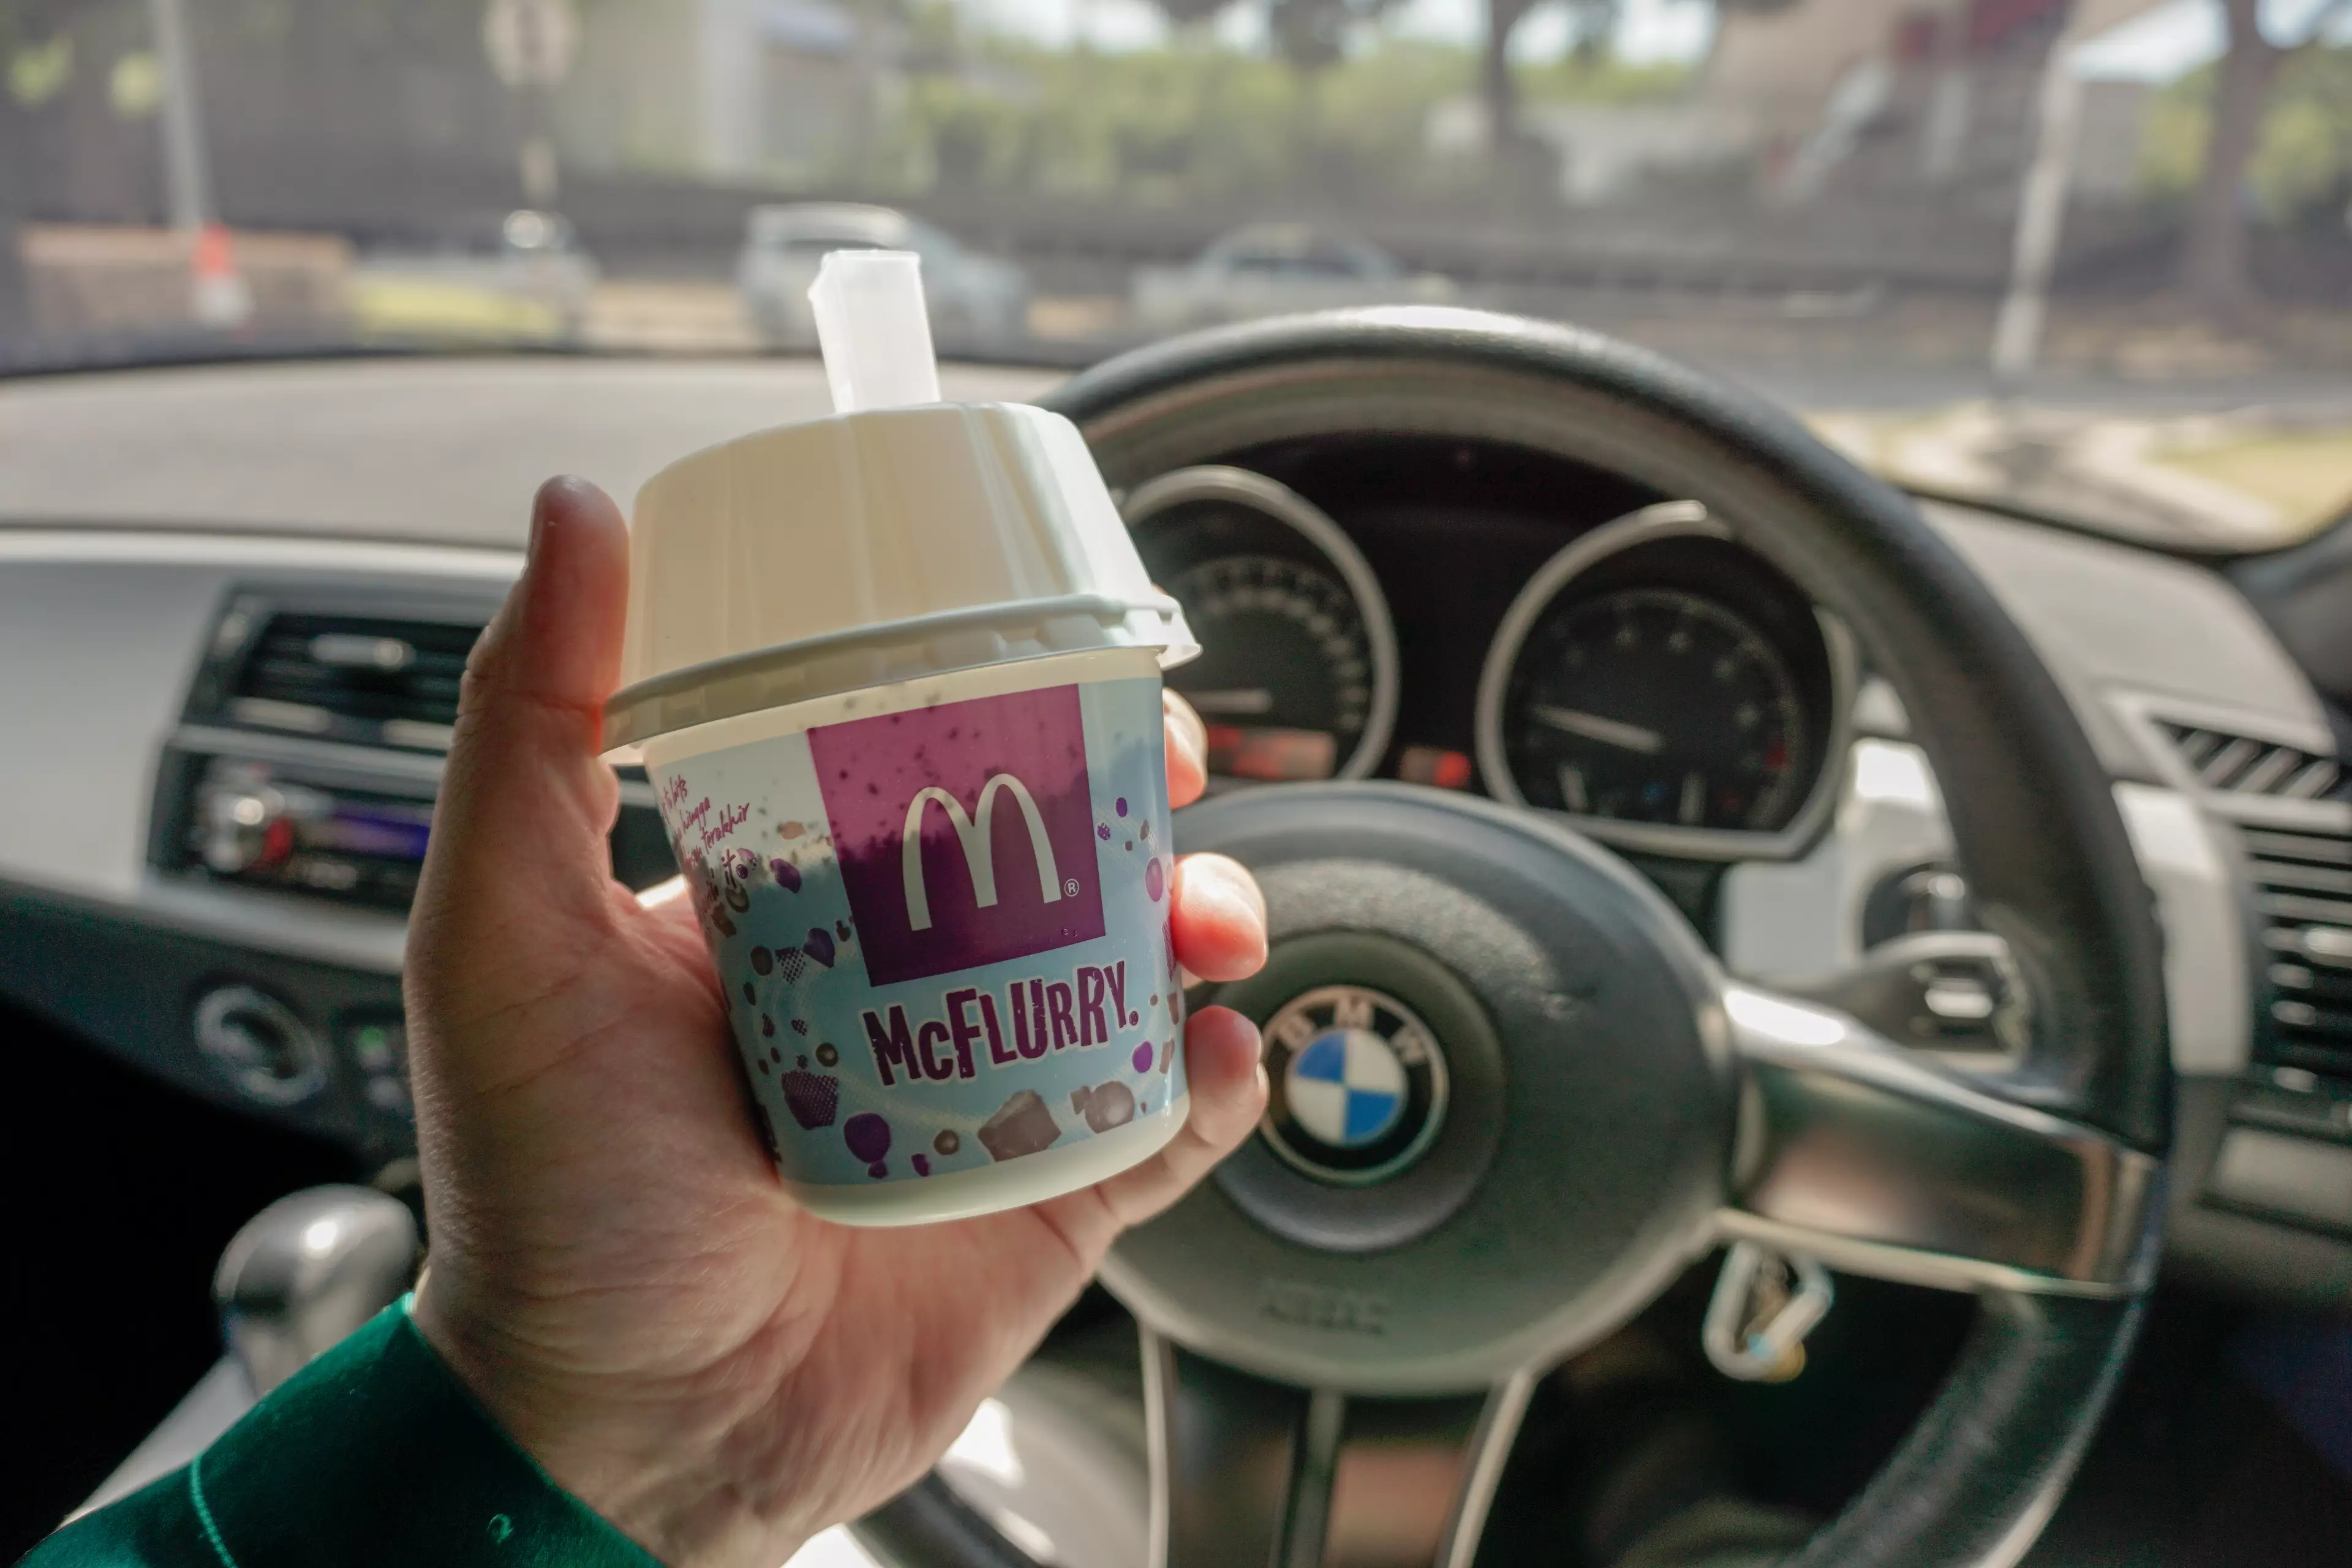 Due to lockdown restrictions, we won't be enjoying a McFlurry any time soon (